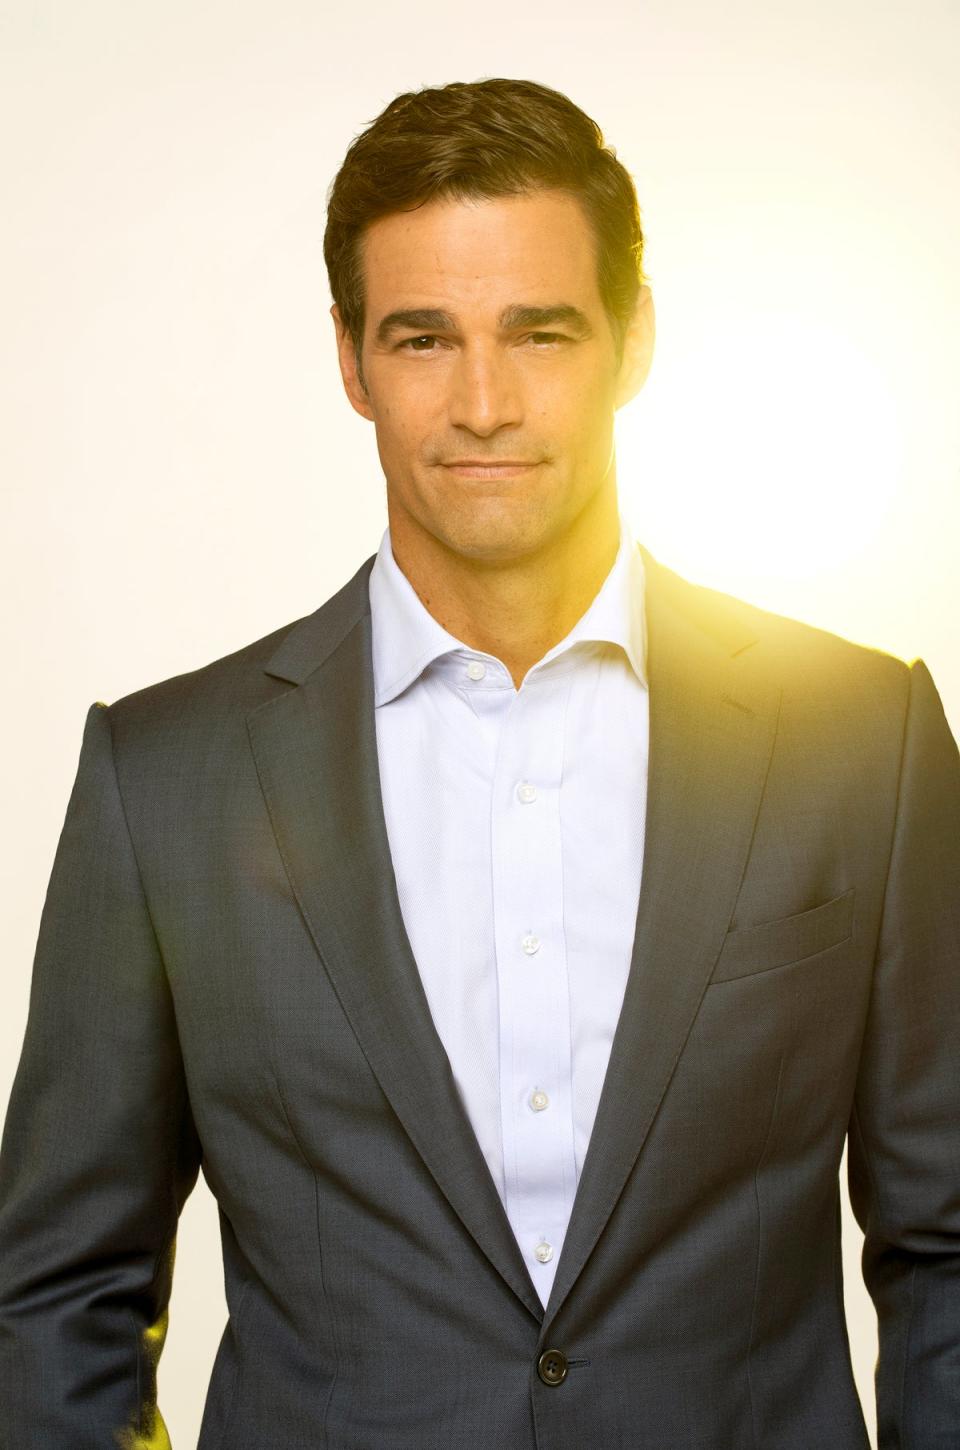 Rob Marciano was reportedly fired from ABC News after a shouting match with a producer (ABC/Heidi Gutman)